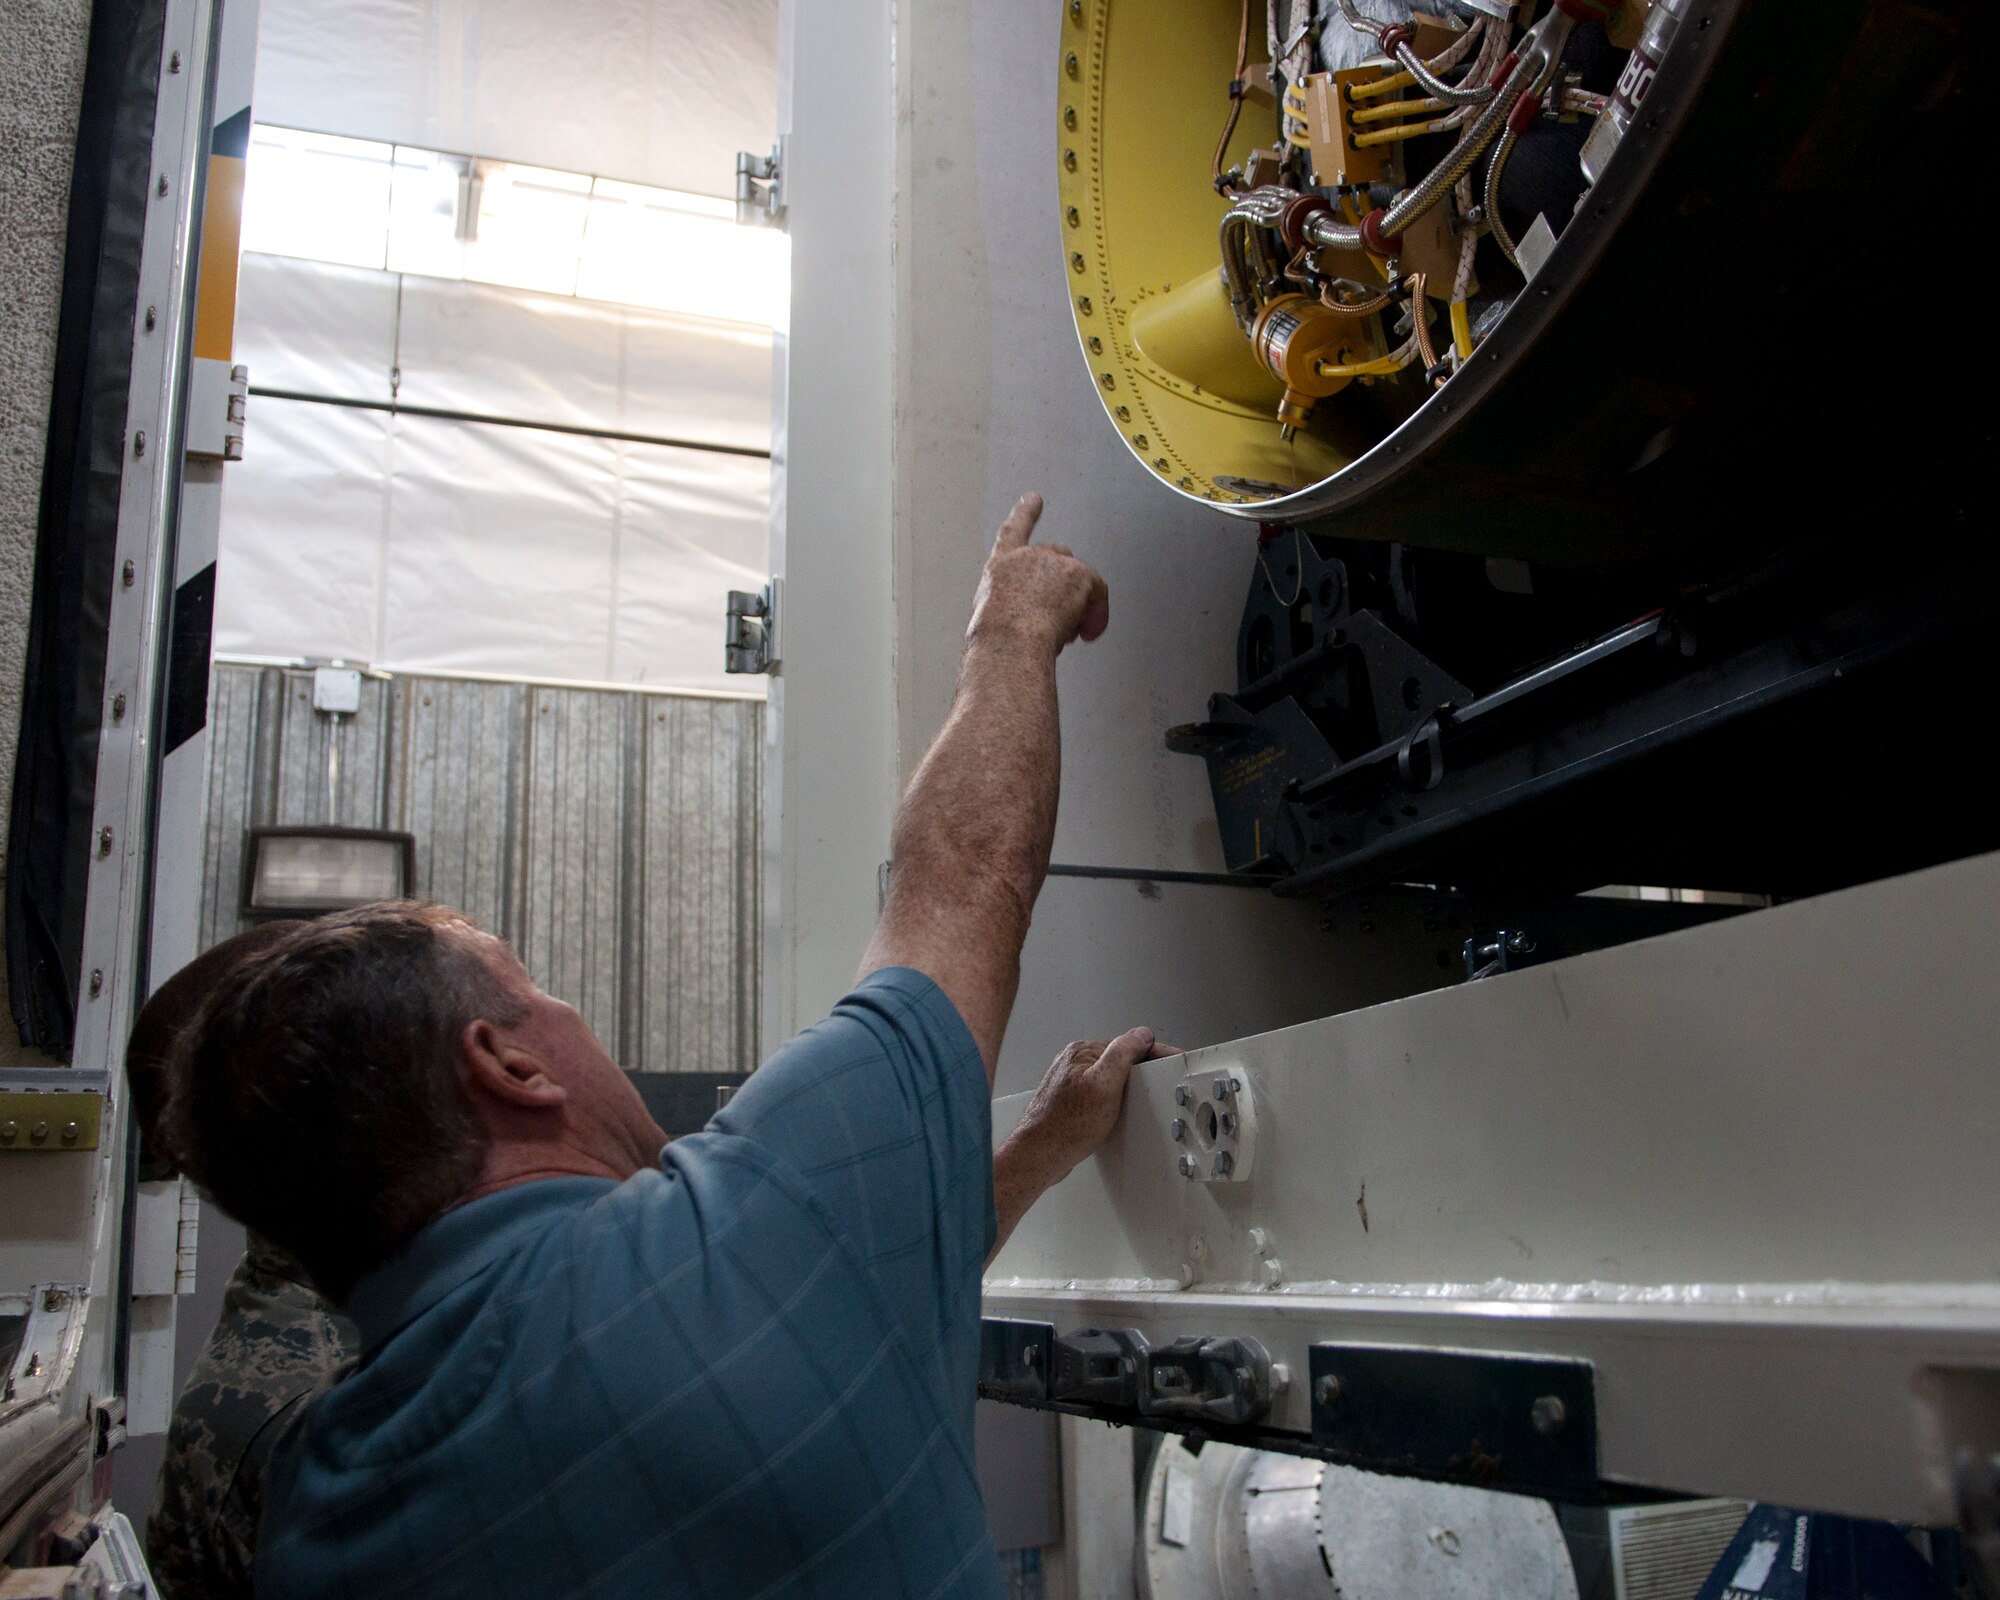 Richard Mullee, 90th MW Safety Office missile safety superintendent, examines the mid-section of the booster of the Minuteman III ICBM during the 90th Missile Maintenance Squadron’s annual weapons safety inspection June 9, 2015, on F.E. Warren Air Force Base, Wyo. This was the last part of the teams inspection of the squadron. (U.S. Air Force photo by Airman 1st Class Malcolm Mayfield)